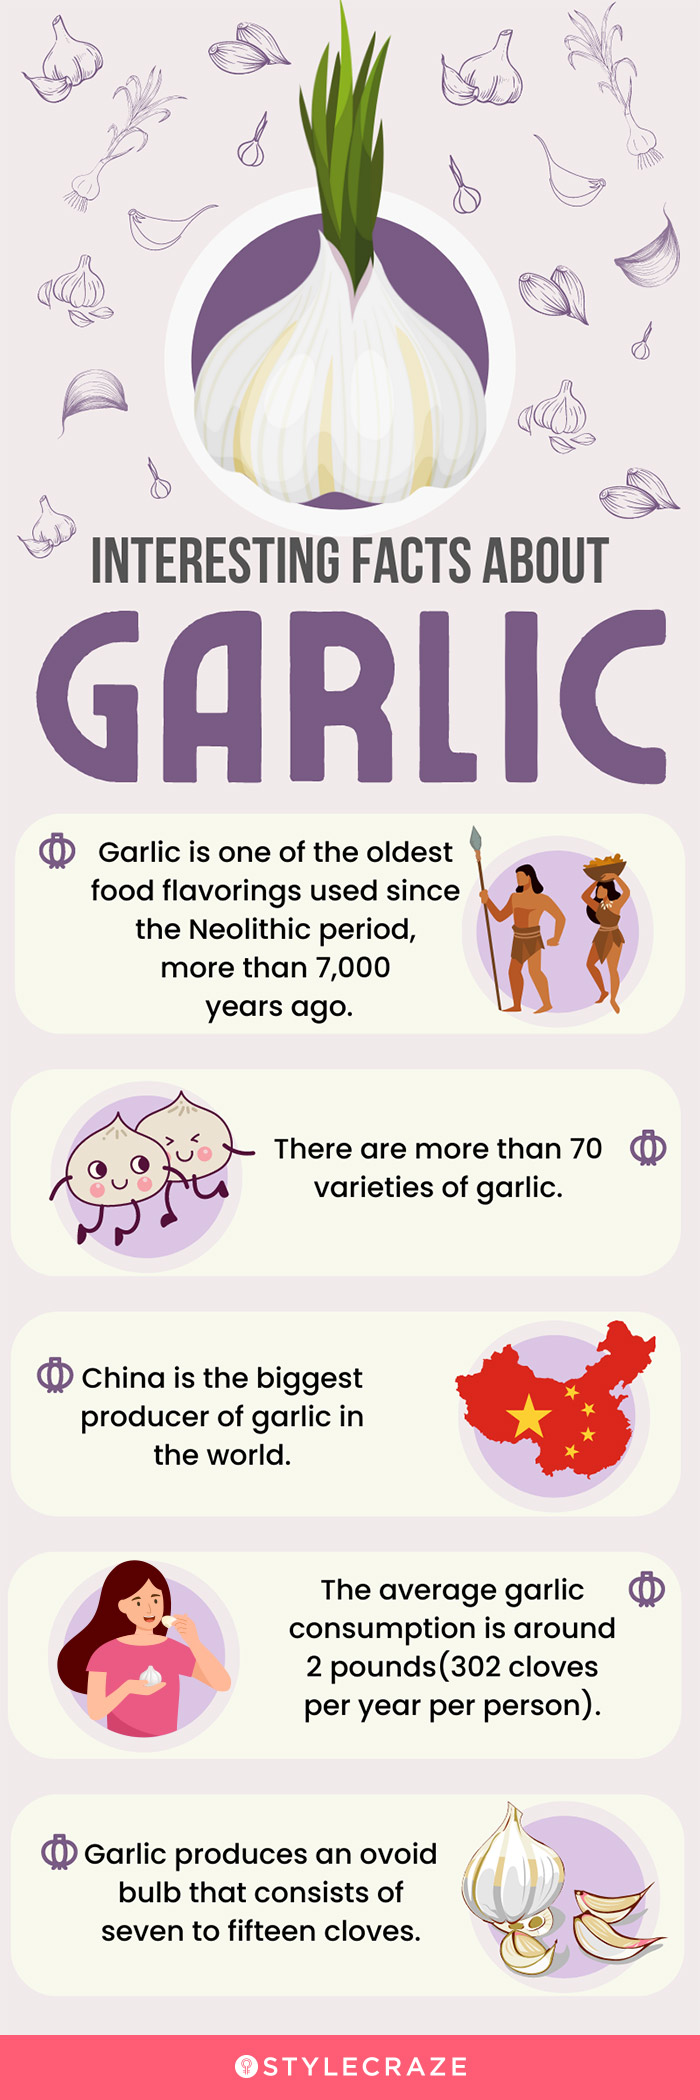 interesting facts about garlic (infographic)